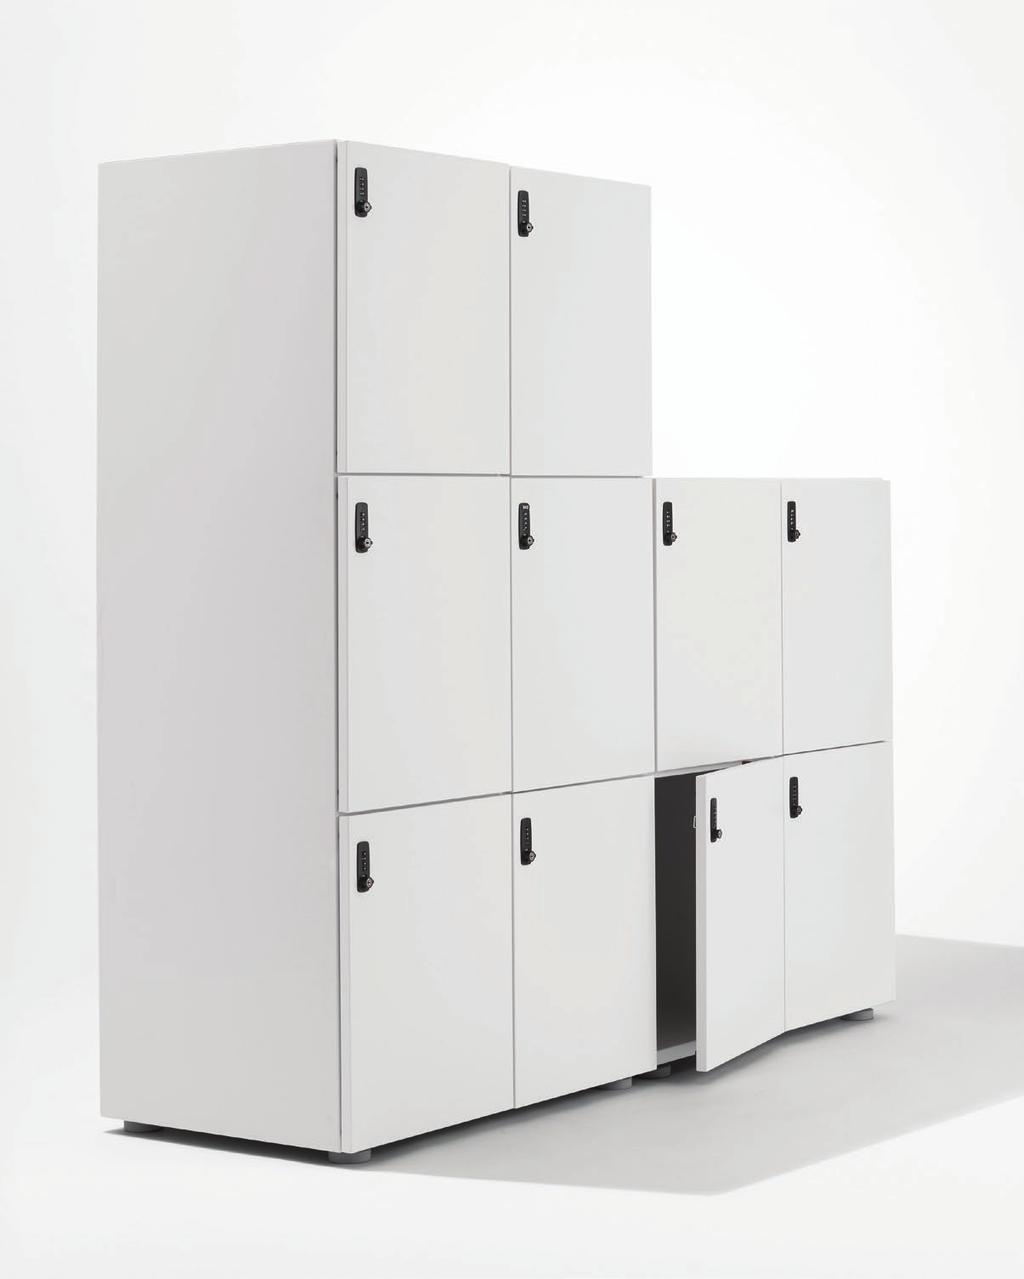 Our lateral cabinet is ideal at the end of a desk row, while our Stash lockers are designed for holding